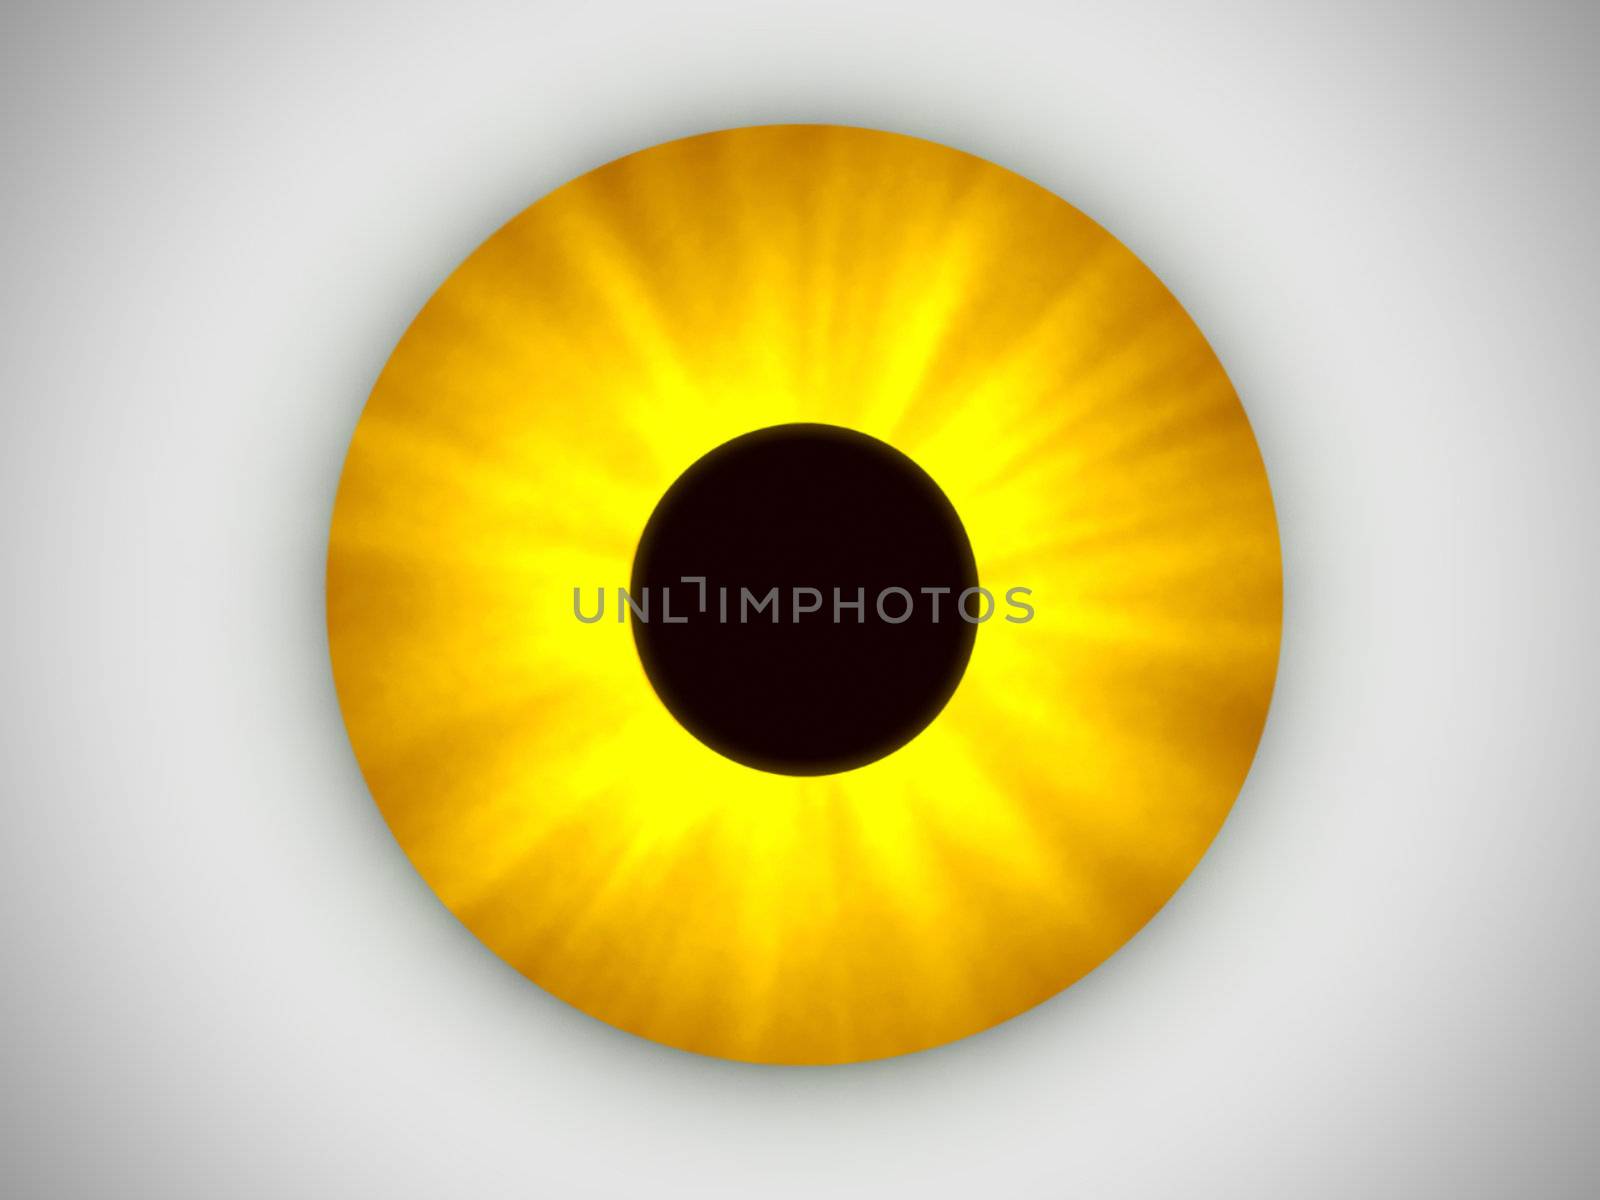 That image shows a generated yellow eye